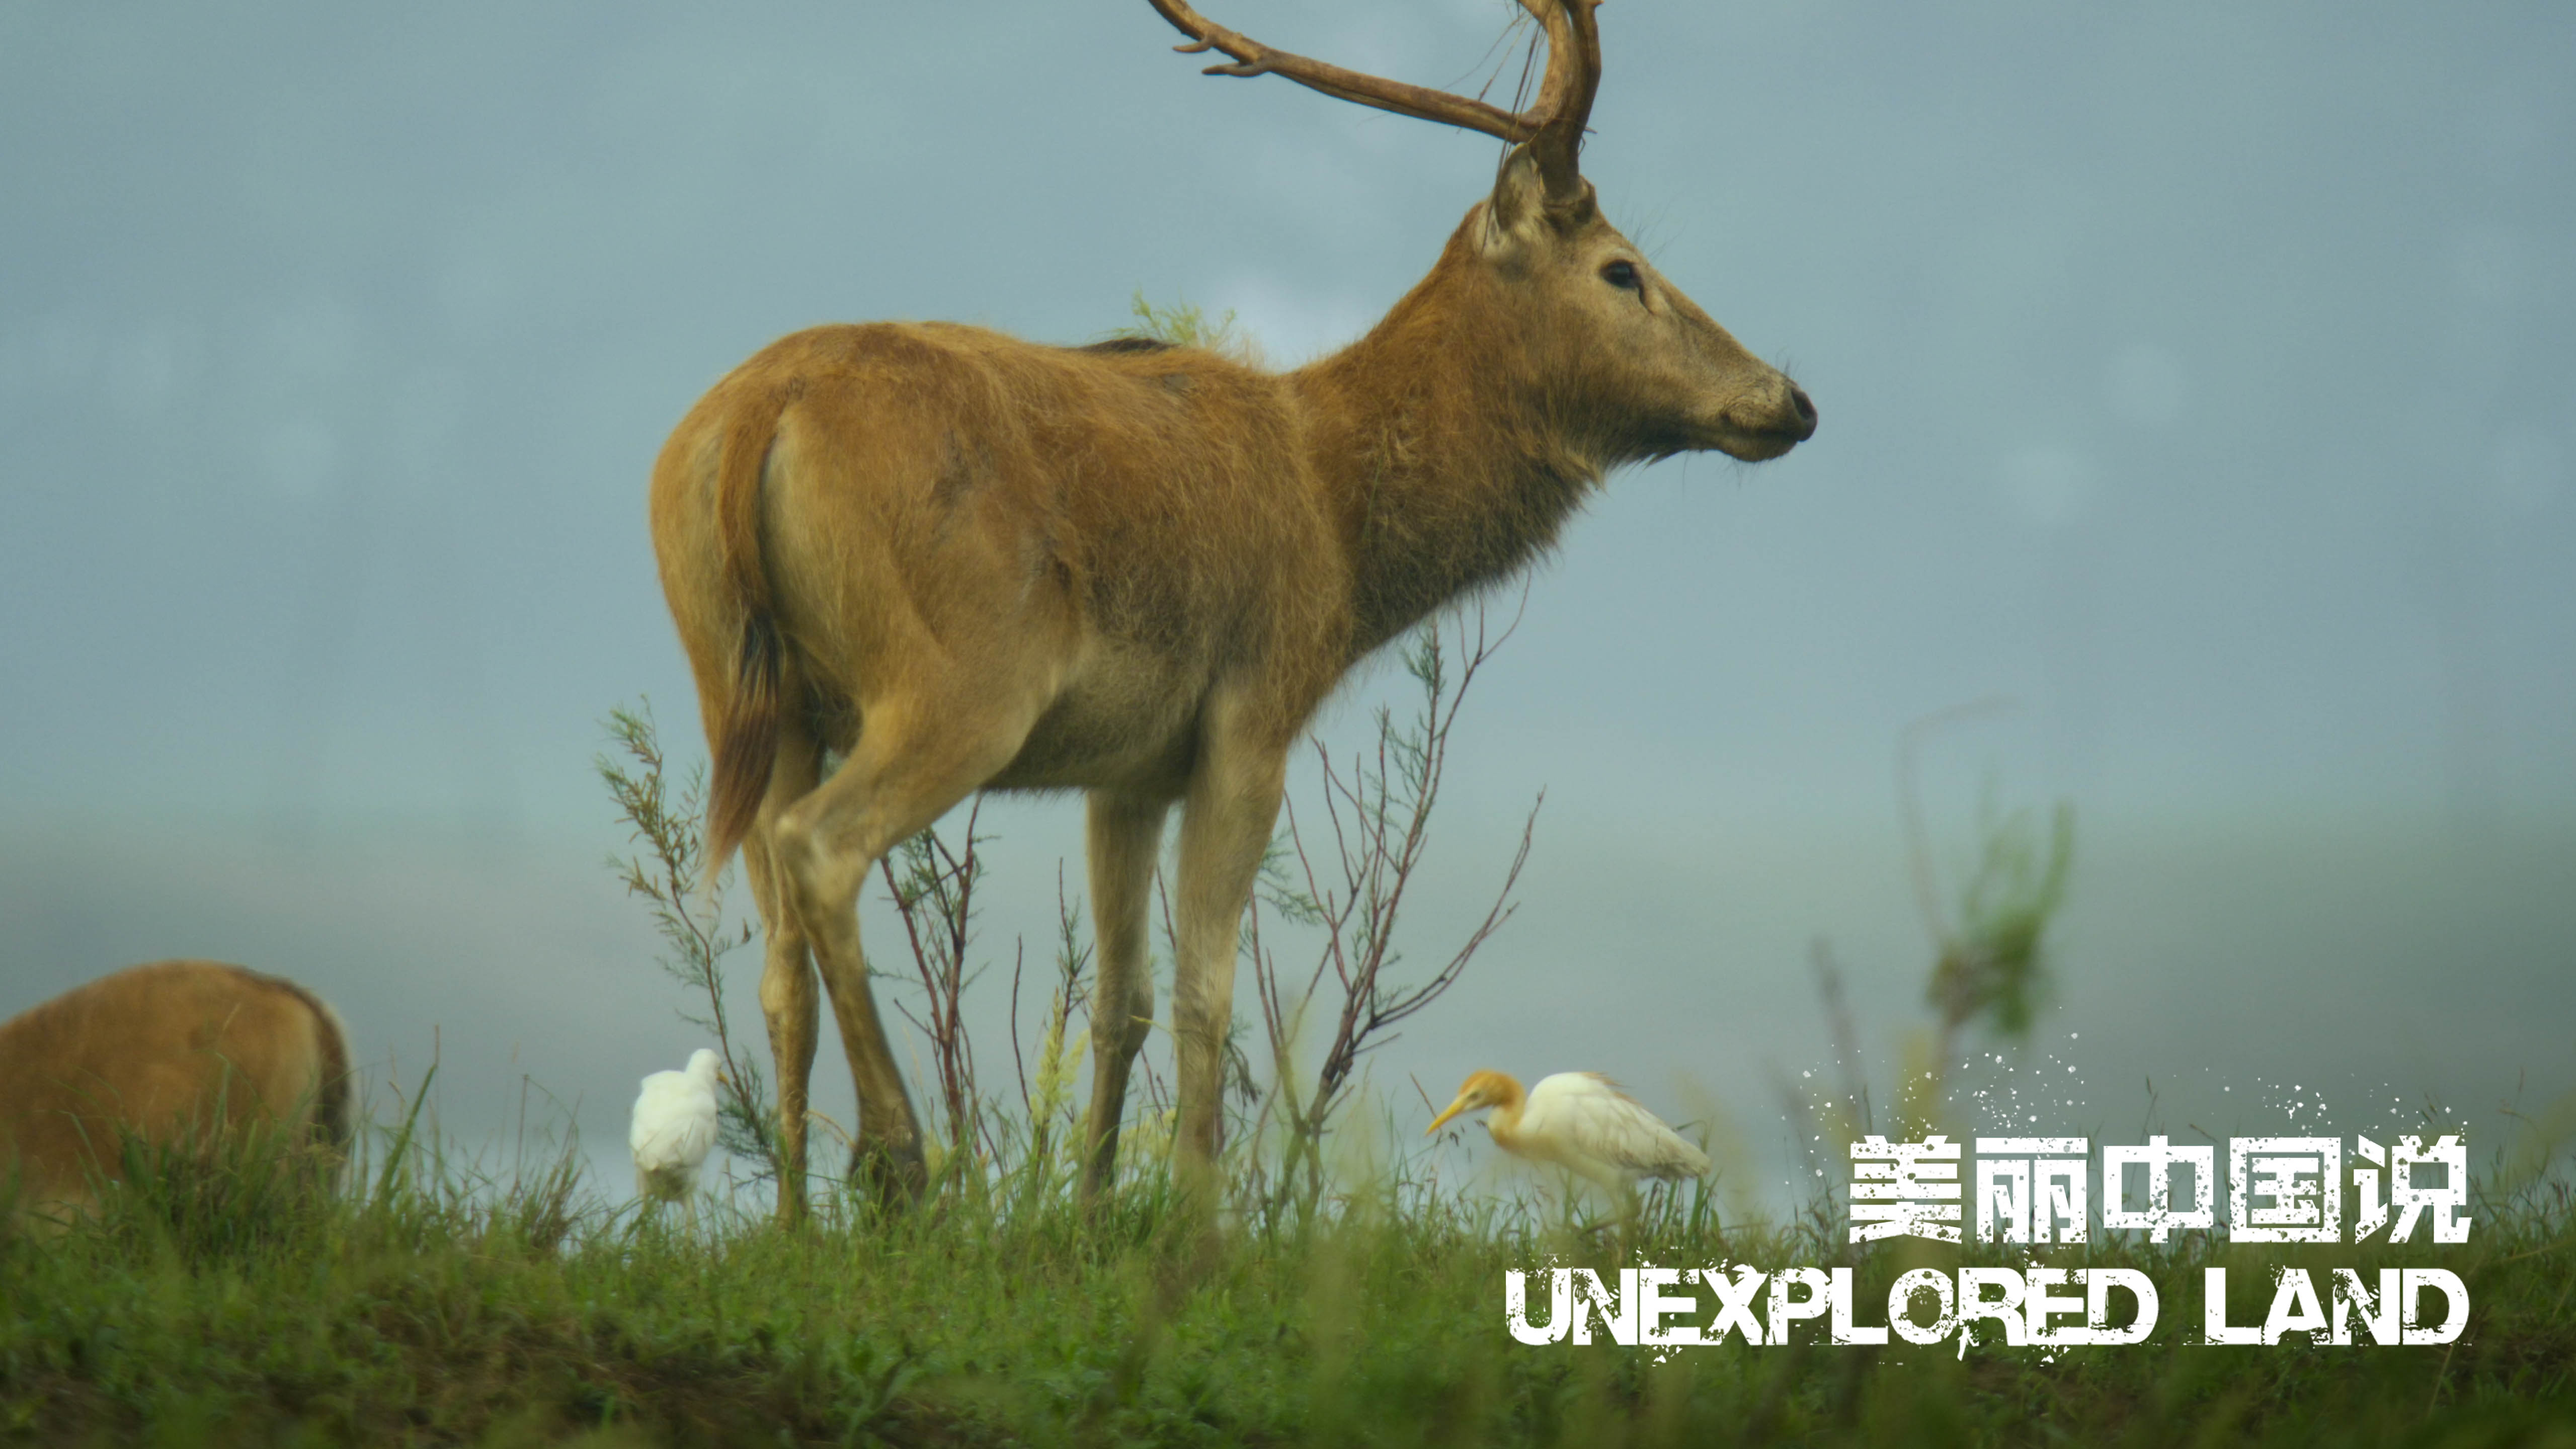 Unexplored Land: It's all about love